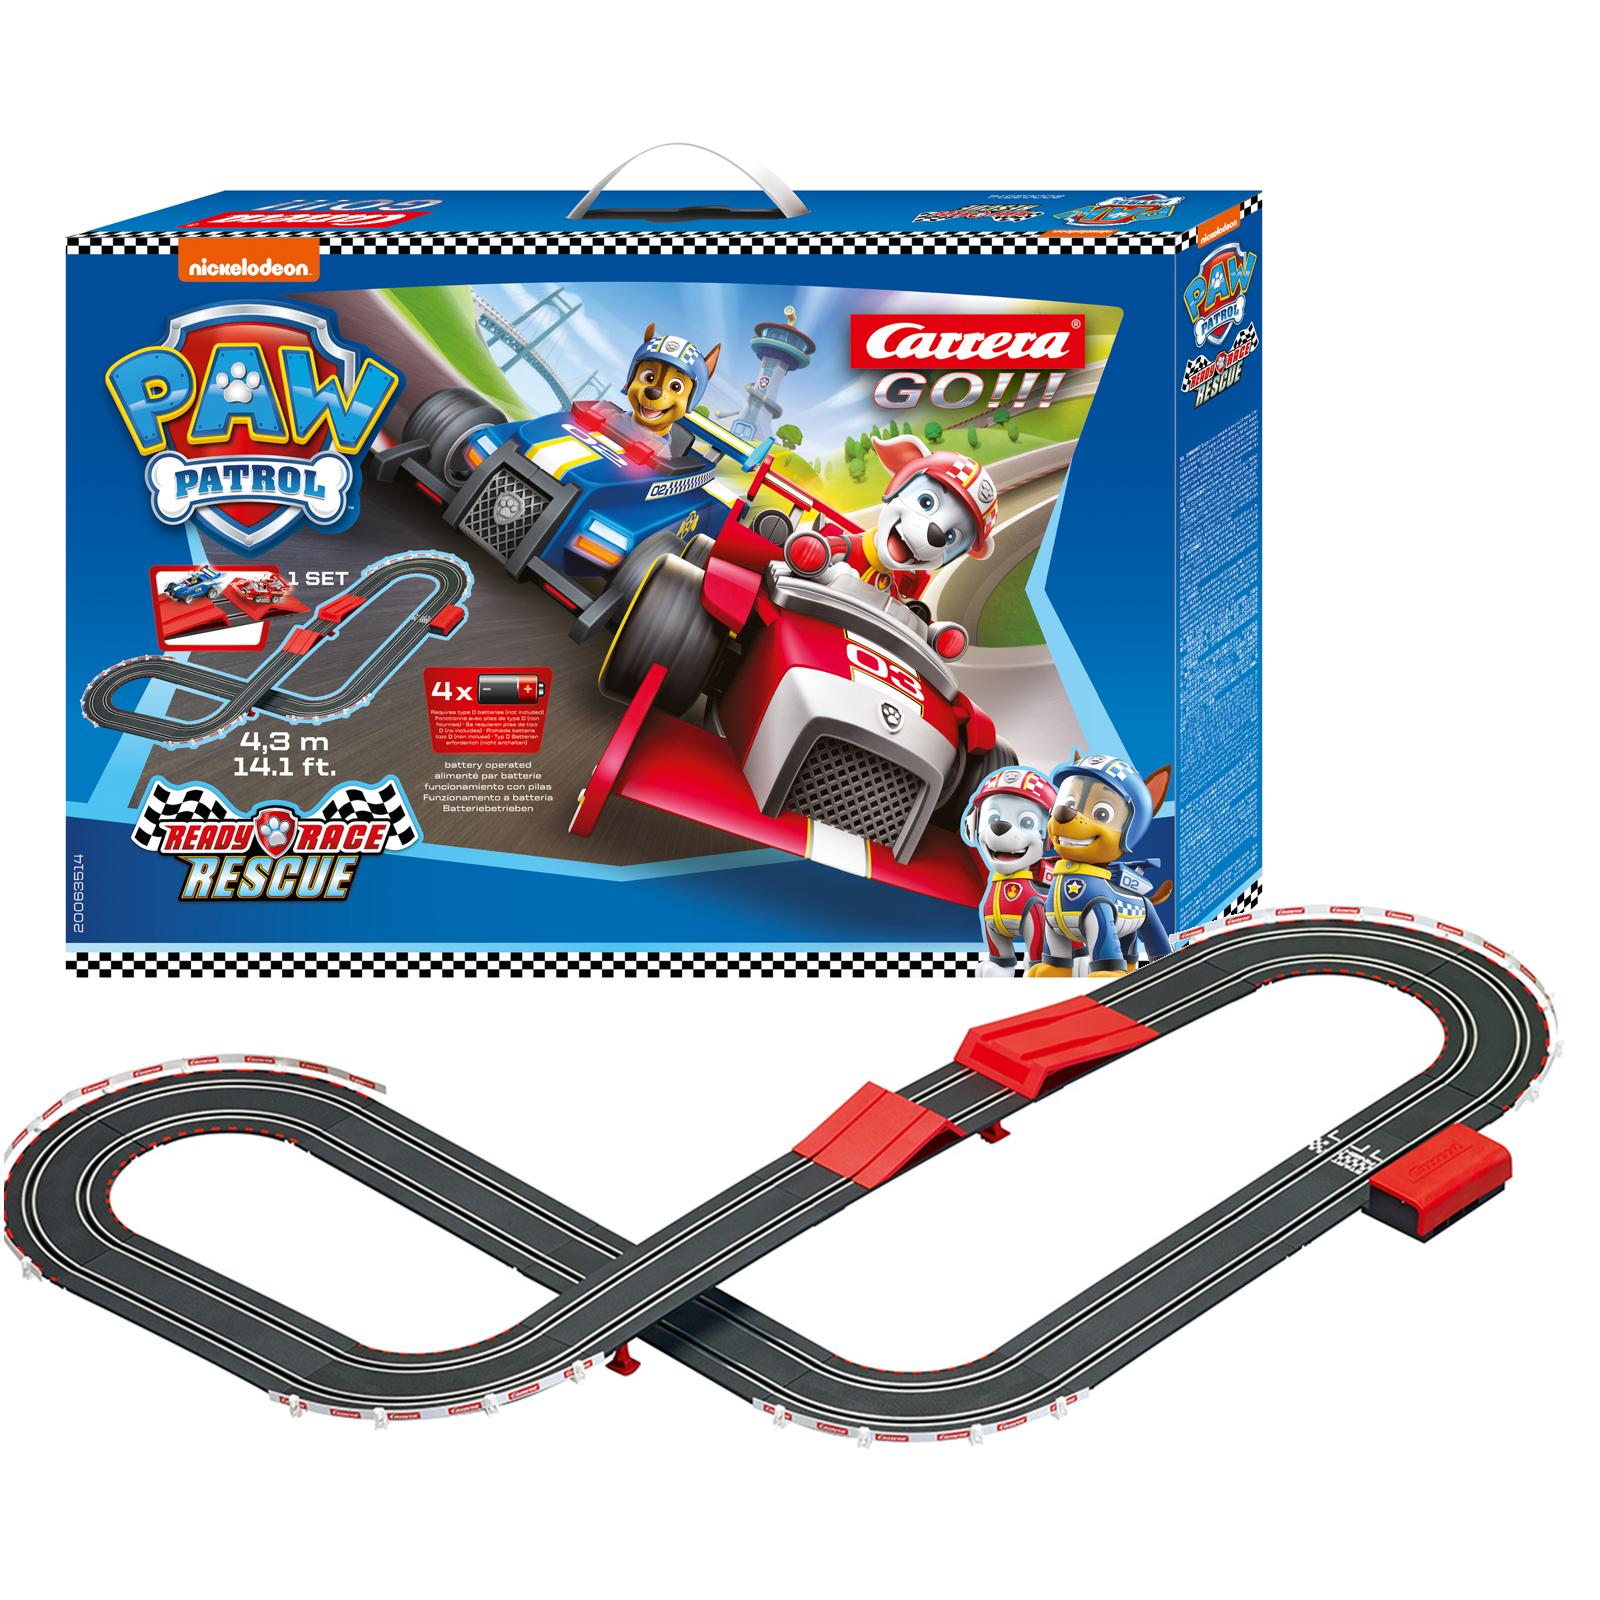 GO! Battery Operated - PAW Patrol - Ready Race Rescue